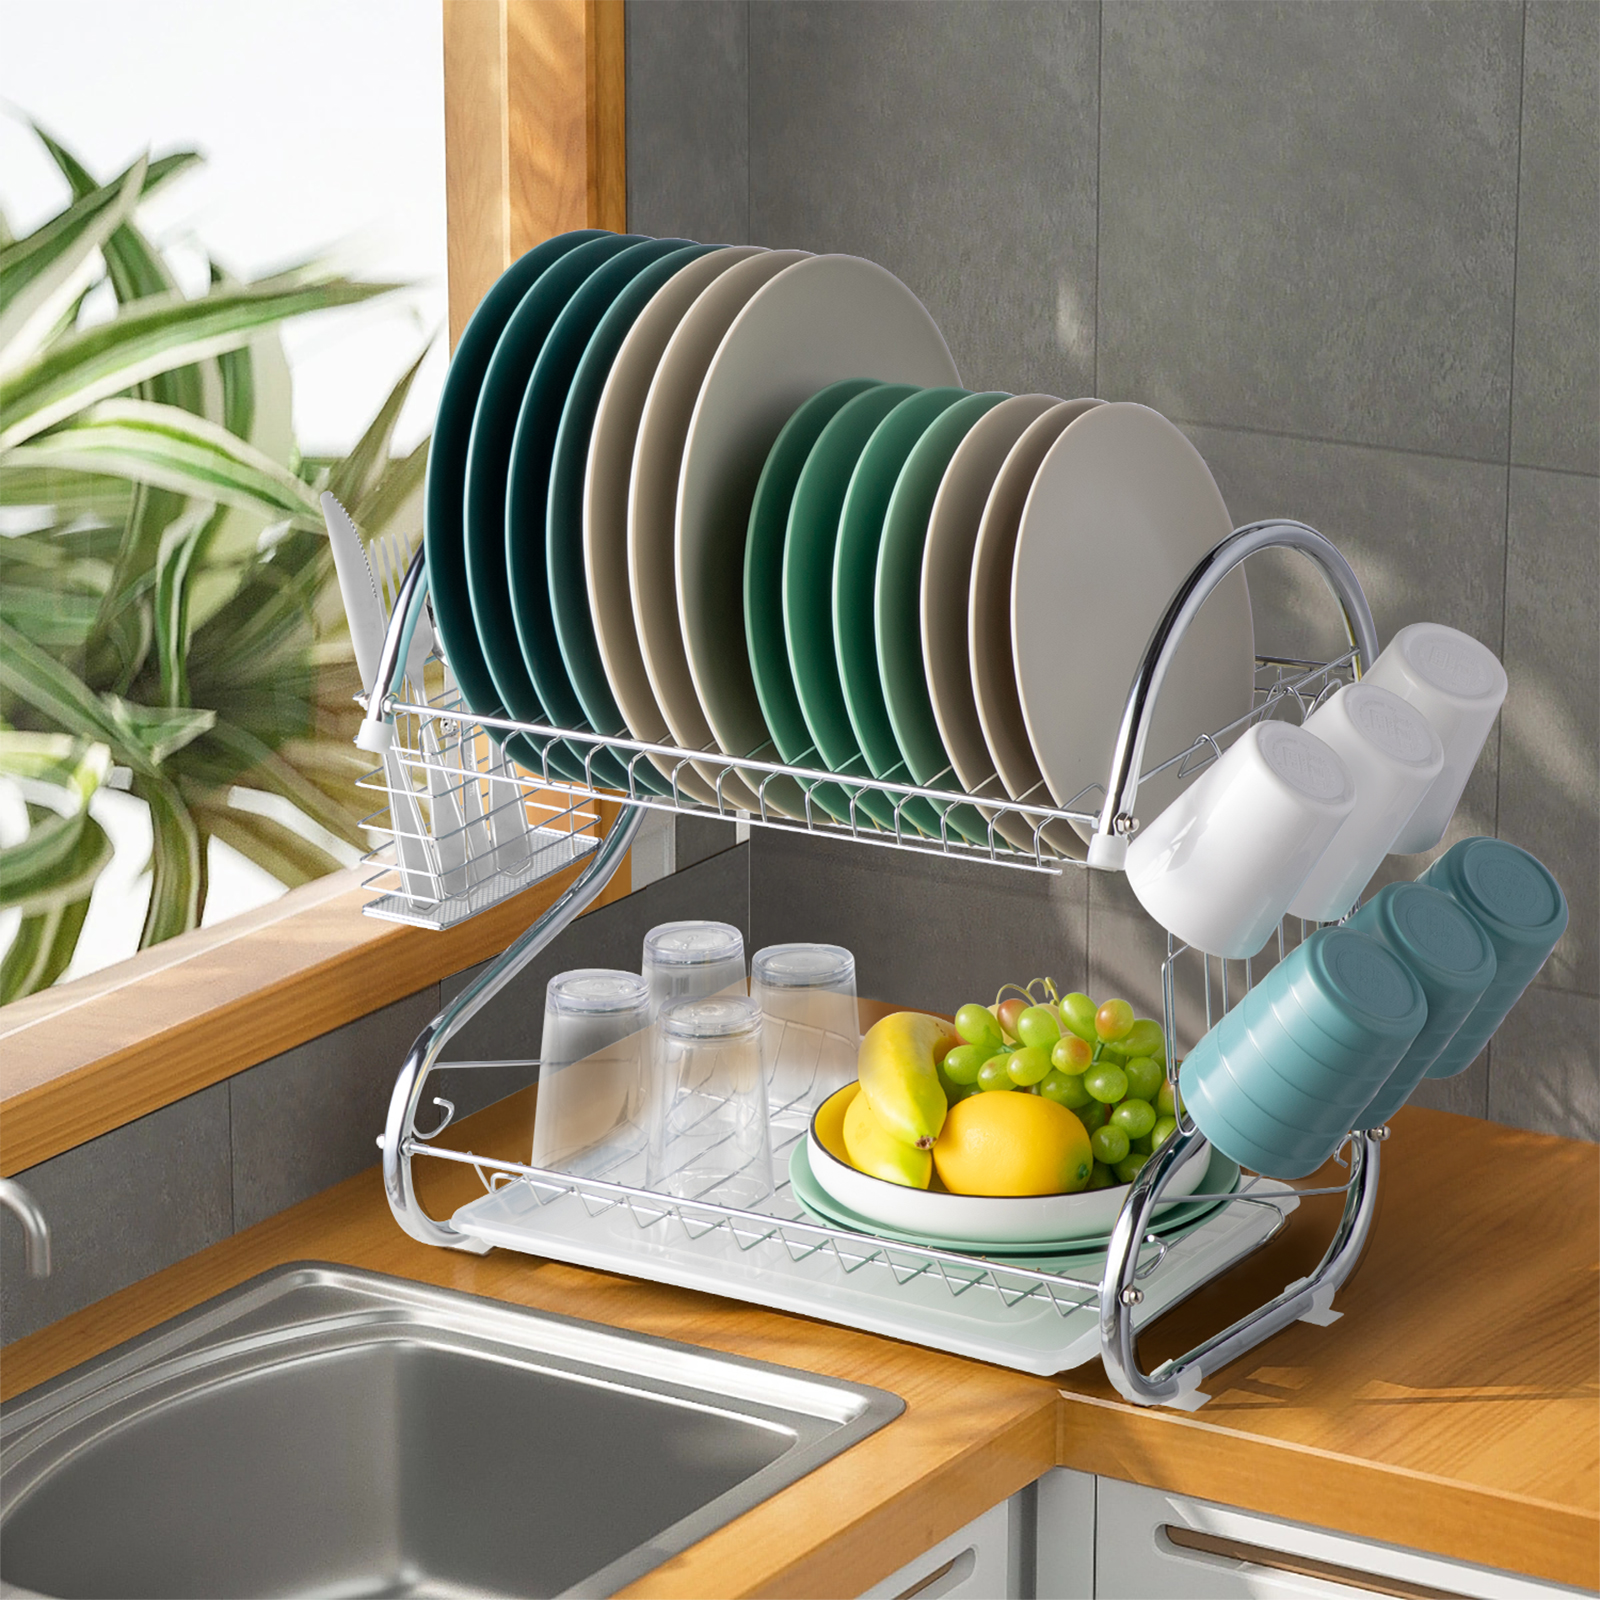 Ktaxon Kitchen Stainless Steel Dish Cup Drying Rack Holder 2-Tier Dish Rack Sink Drainer - image 1 of 11